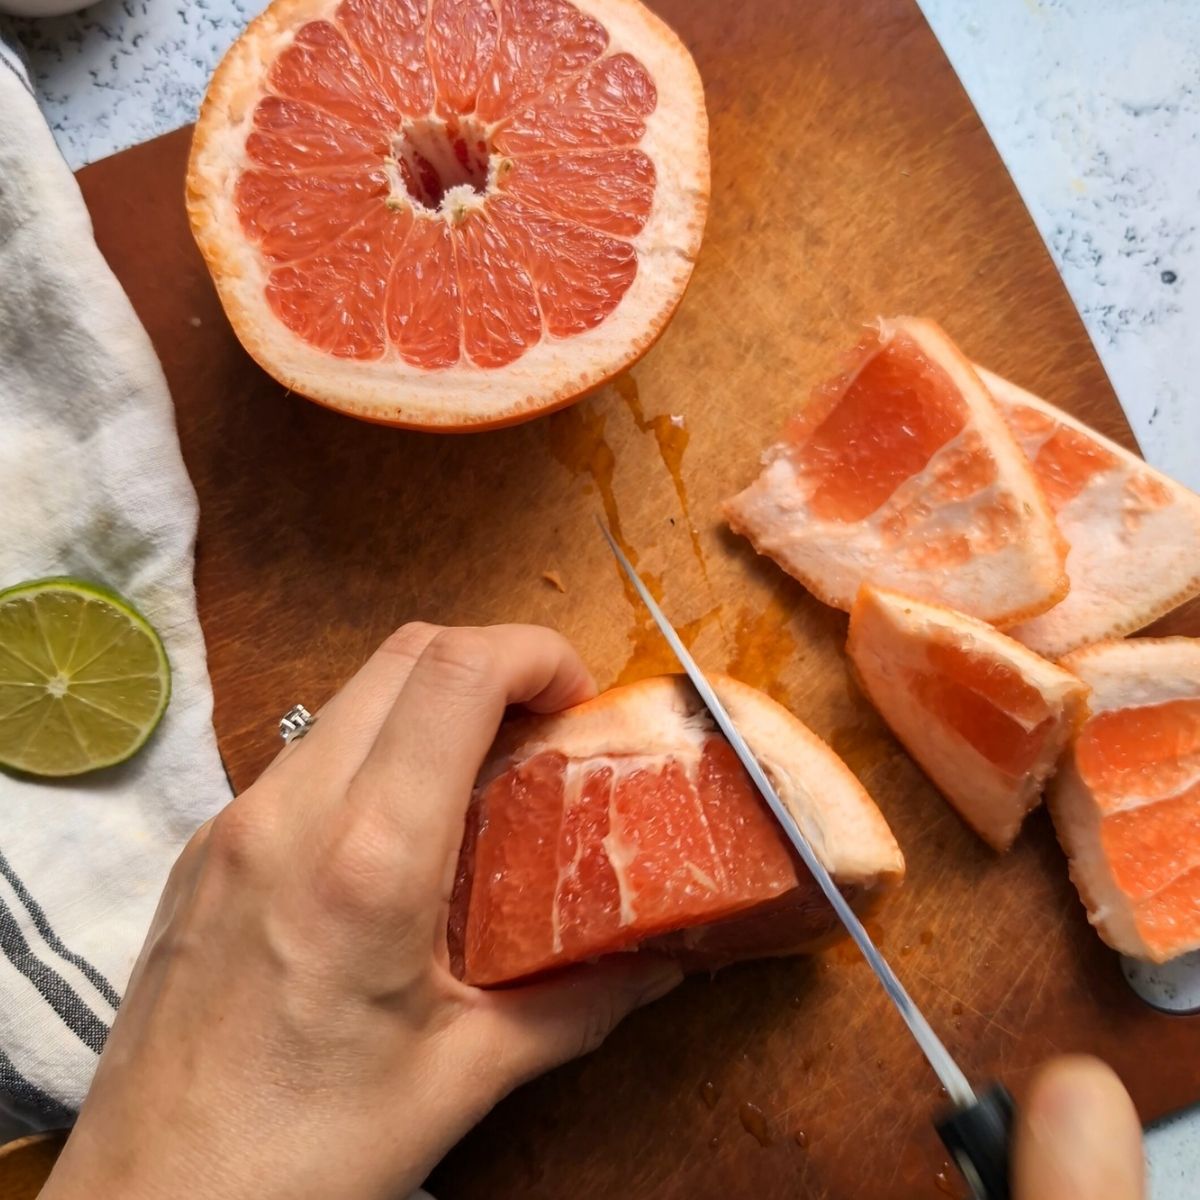 a knife cutting away the skin of the grapefruit carefully on a cutting board.